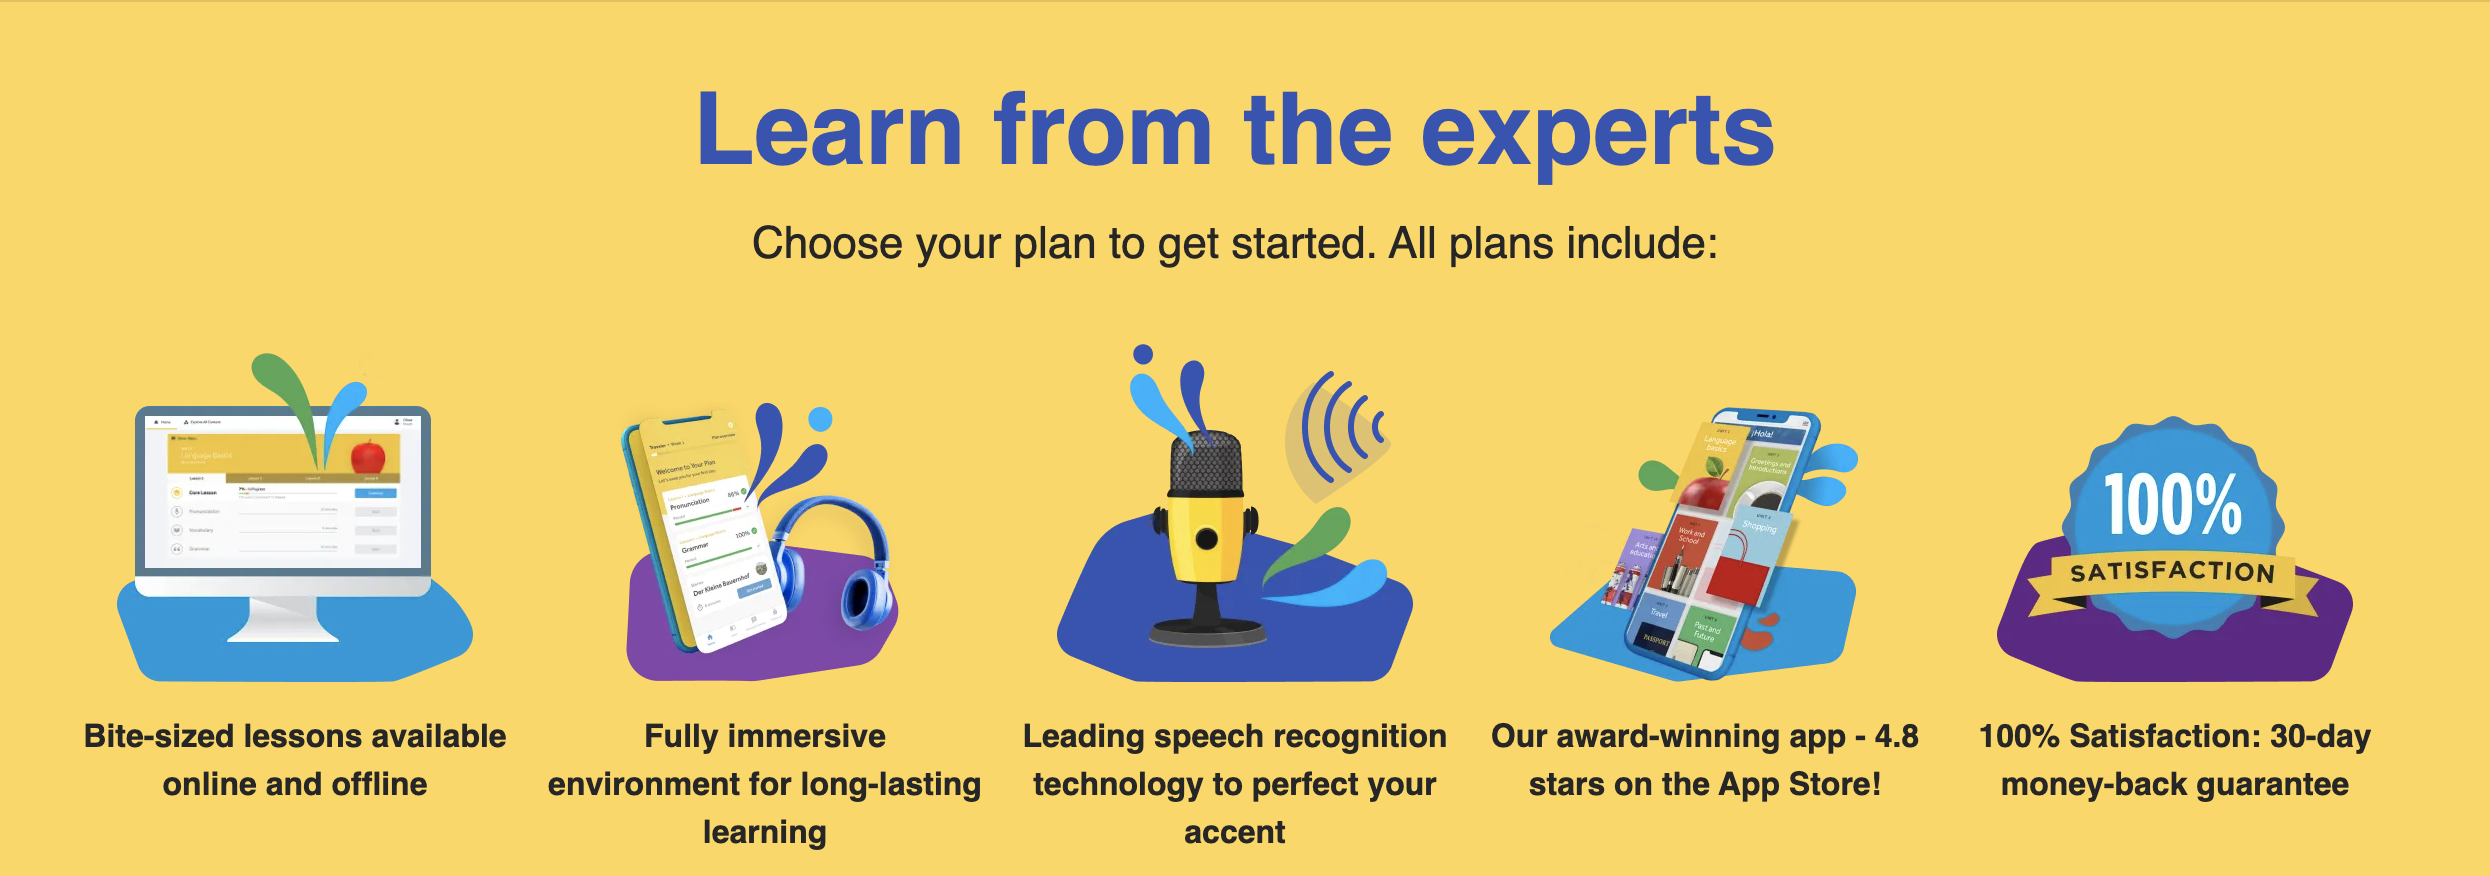 Learn from the experts; plans include bite-size lessons, immersive environments, speech recognition, an award-winning app and 30-day money back guarantee